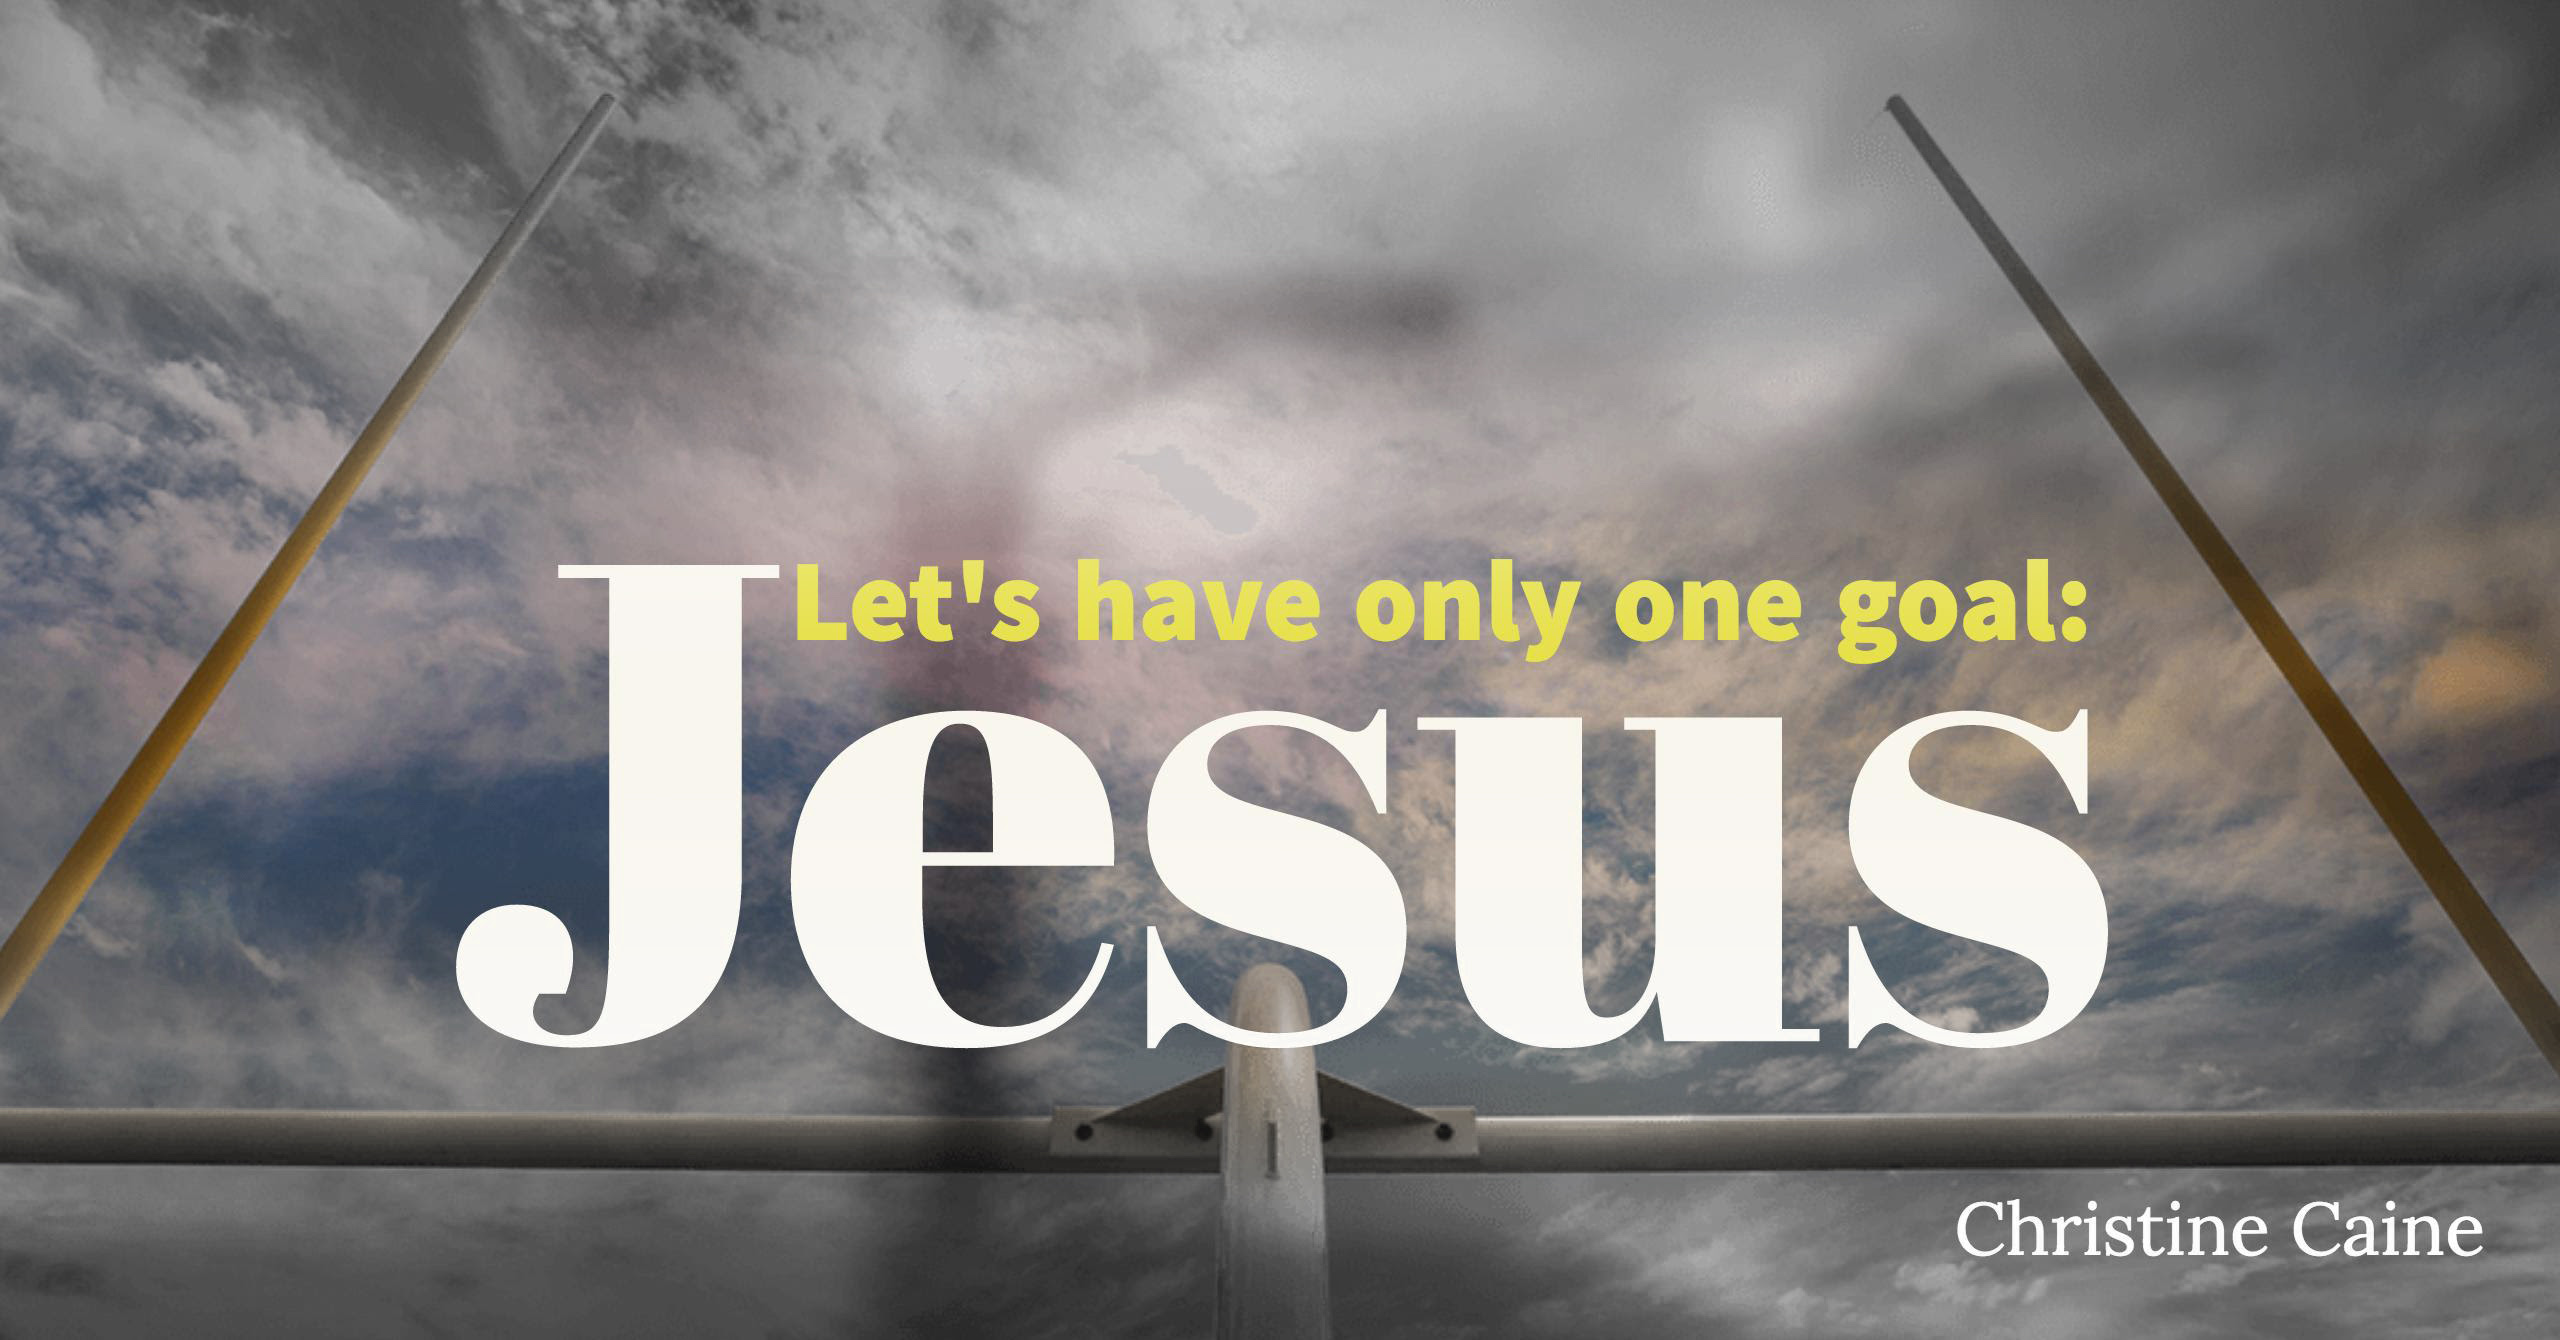 Let us have only one goal and let that goal be Jesus